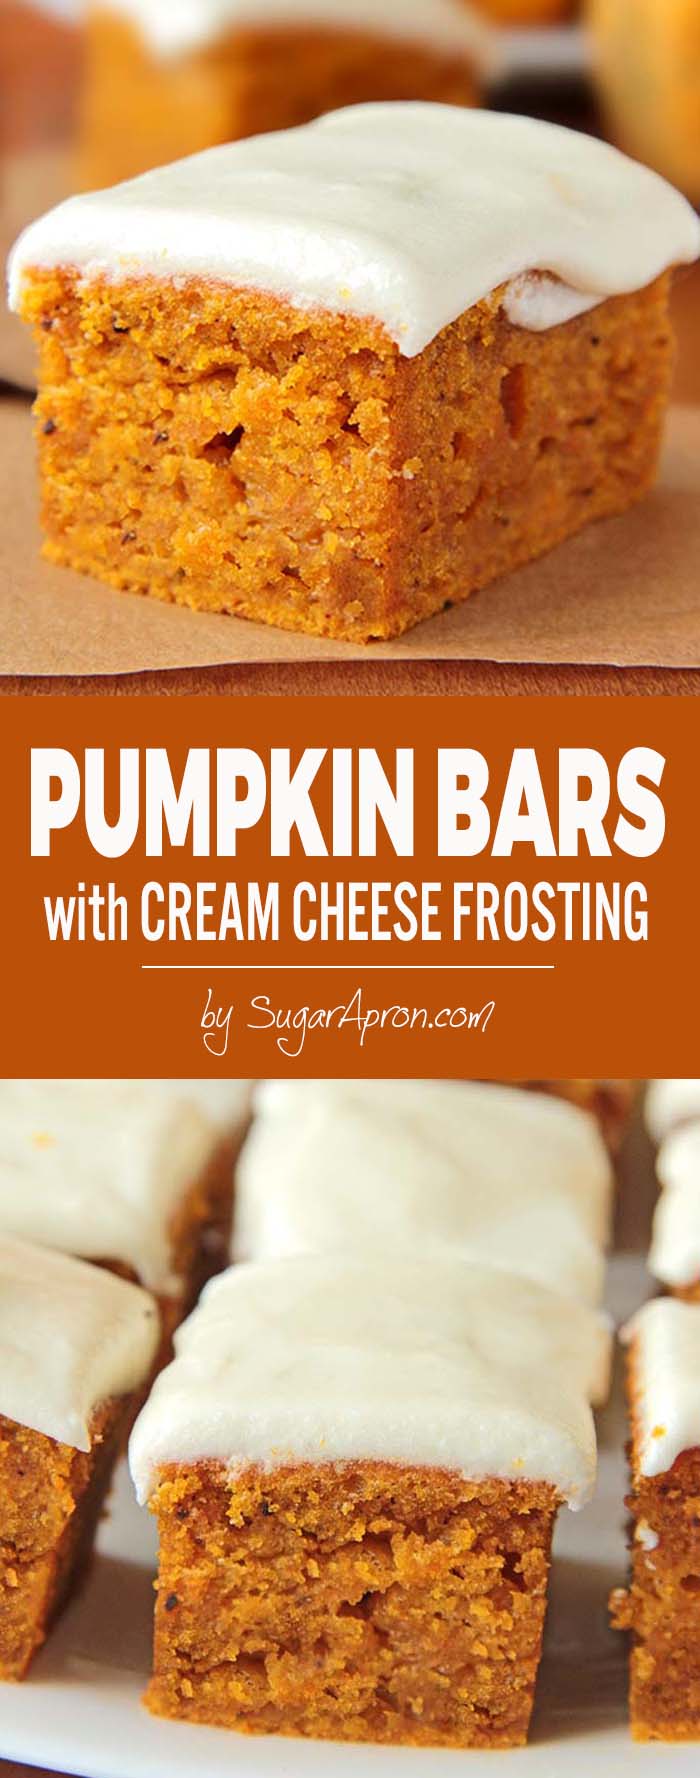 A perfect fall dessert, delicious pumpkin bars with cream cheese frosting.